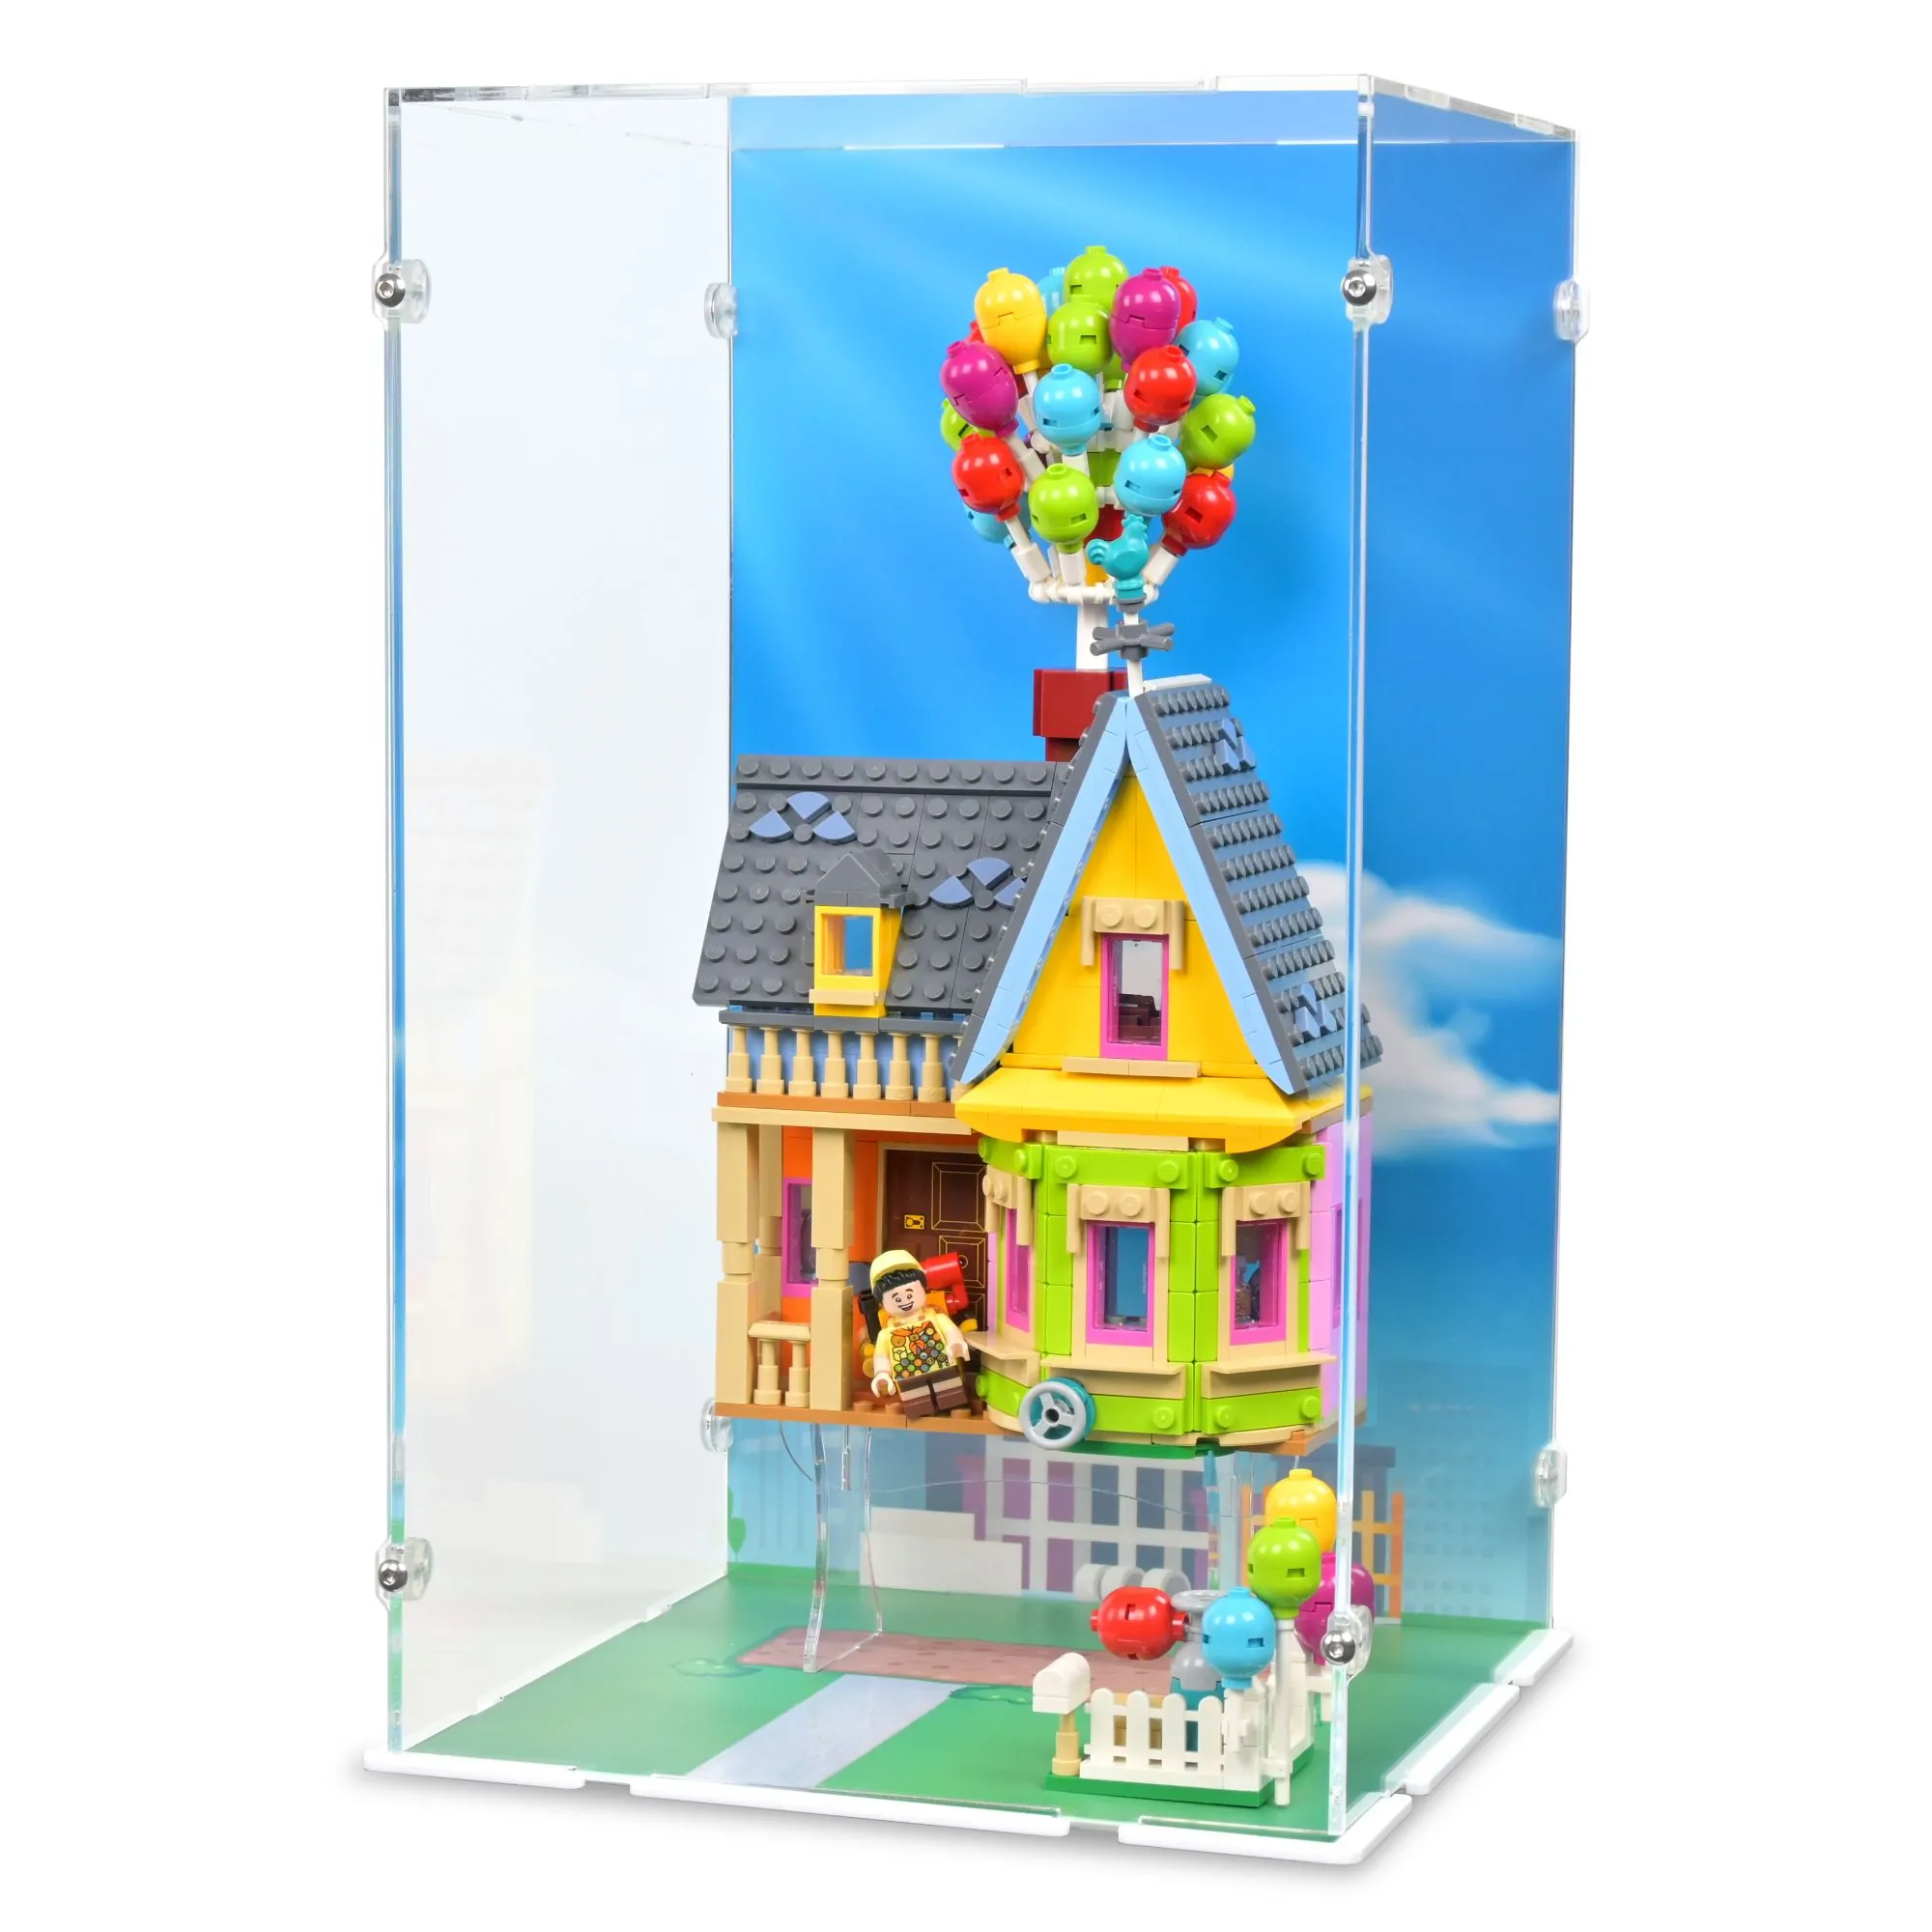 Lego 43217 ‘Up’ House Display Stand